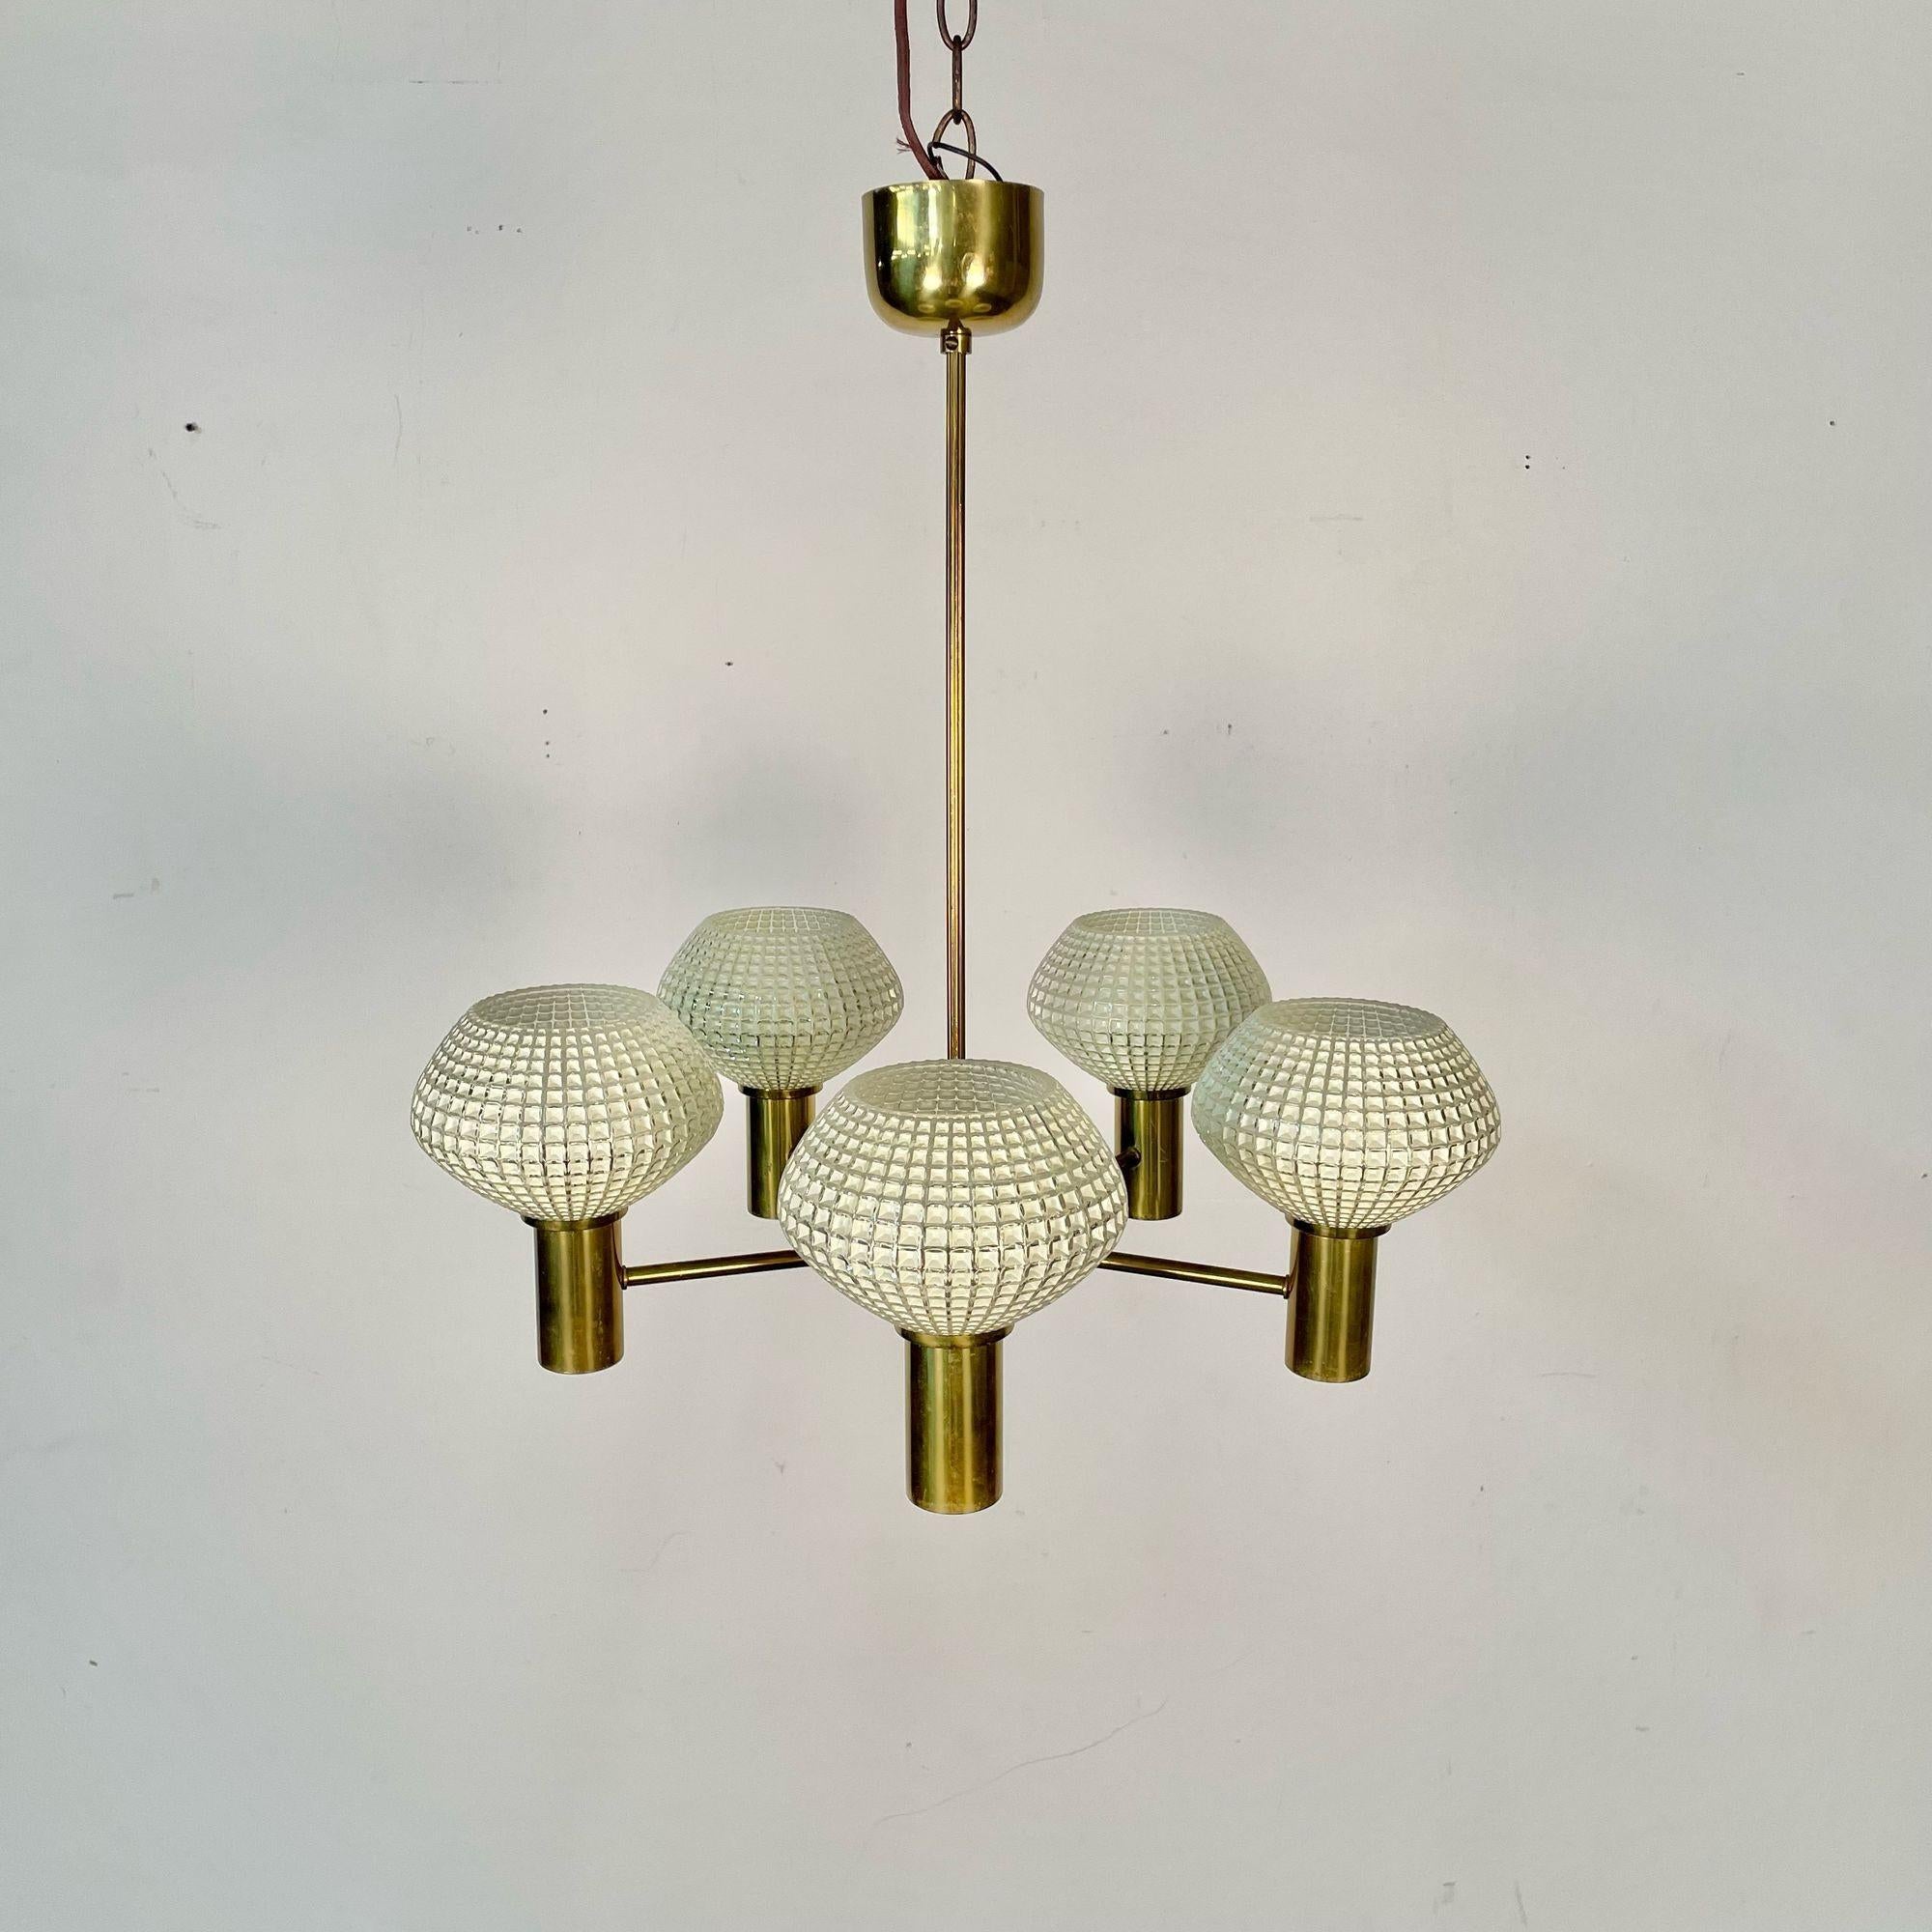 Swedish Mid-Century Modern Chandelier, Five Light, Brass and Textured Glass For Sale 1